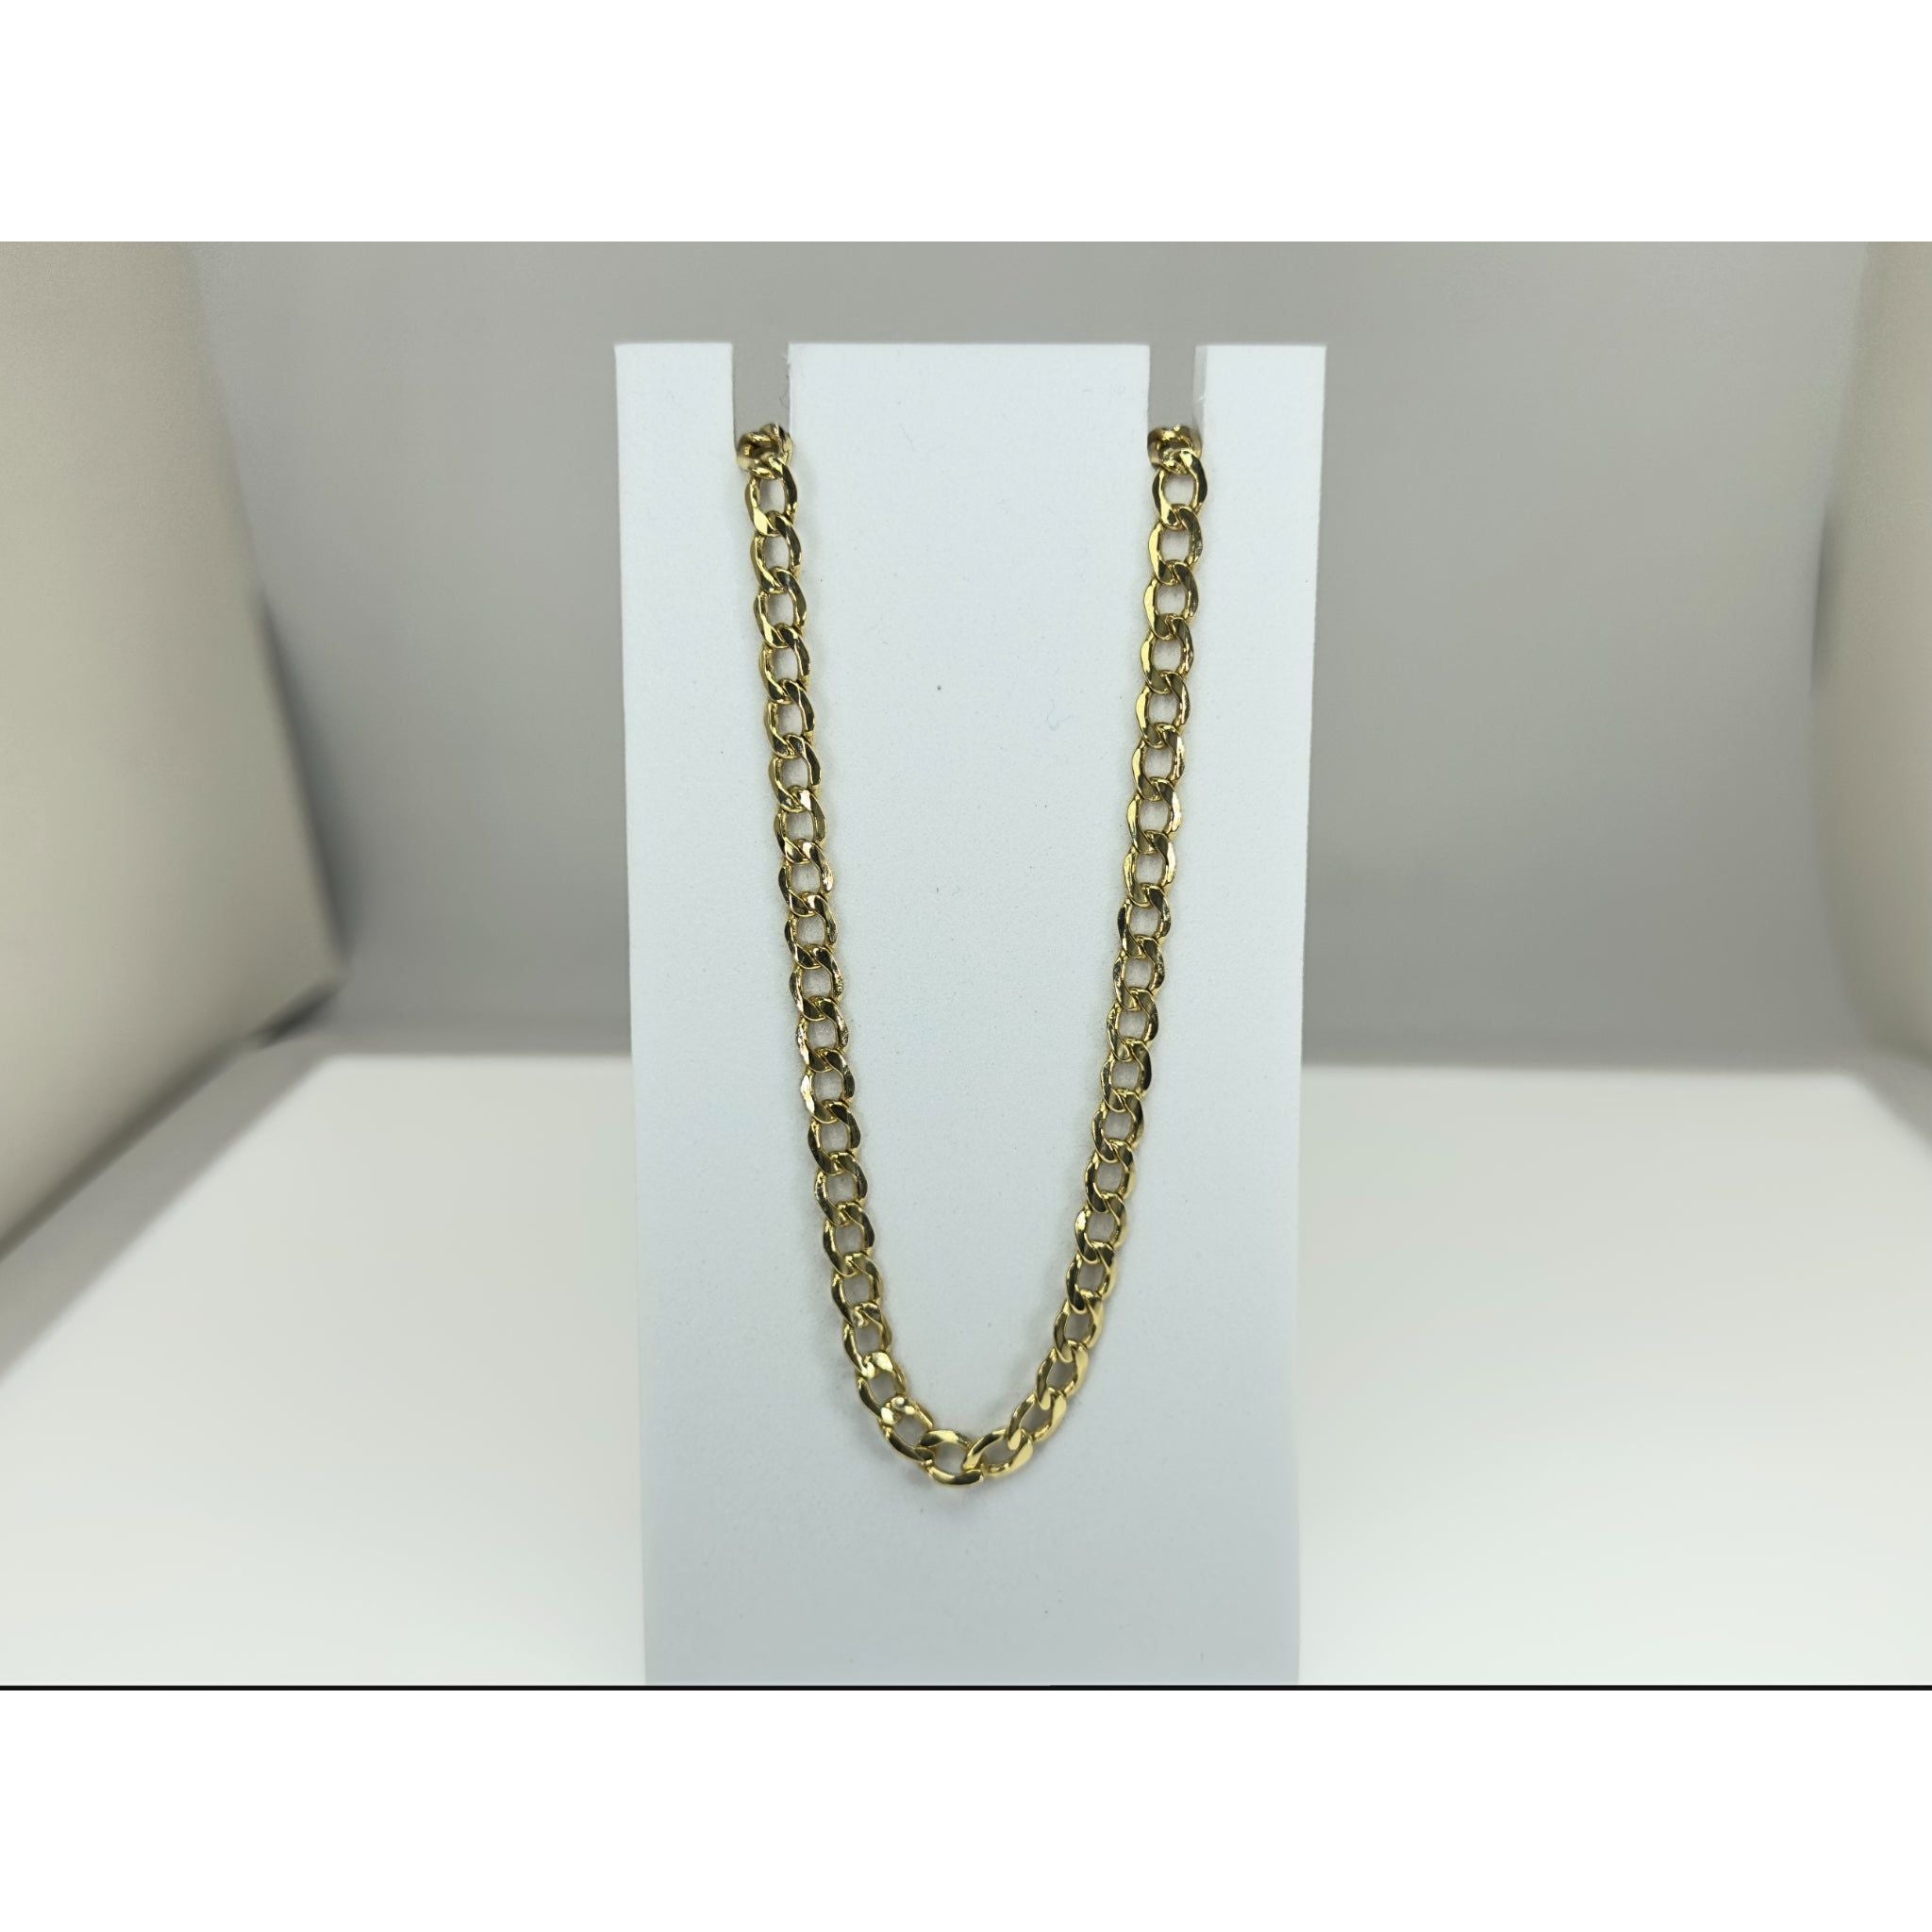 DR1723 - 14K Yellow Gold - Men's Gold Chains